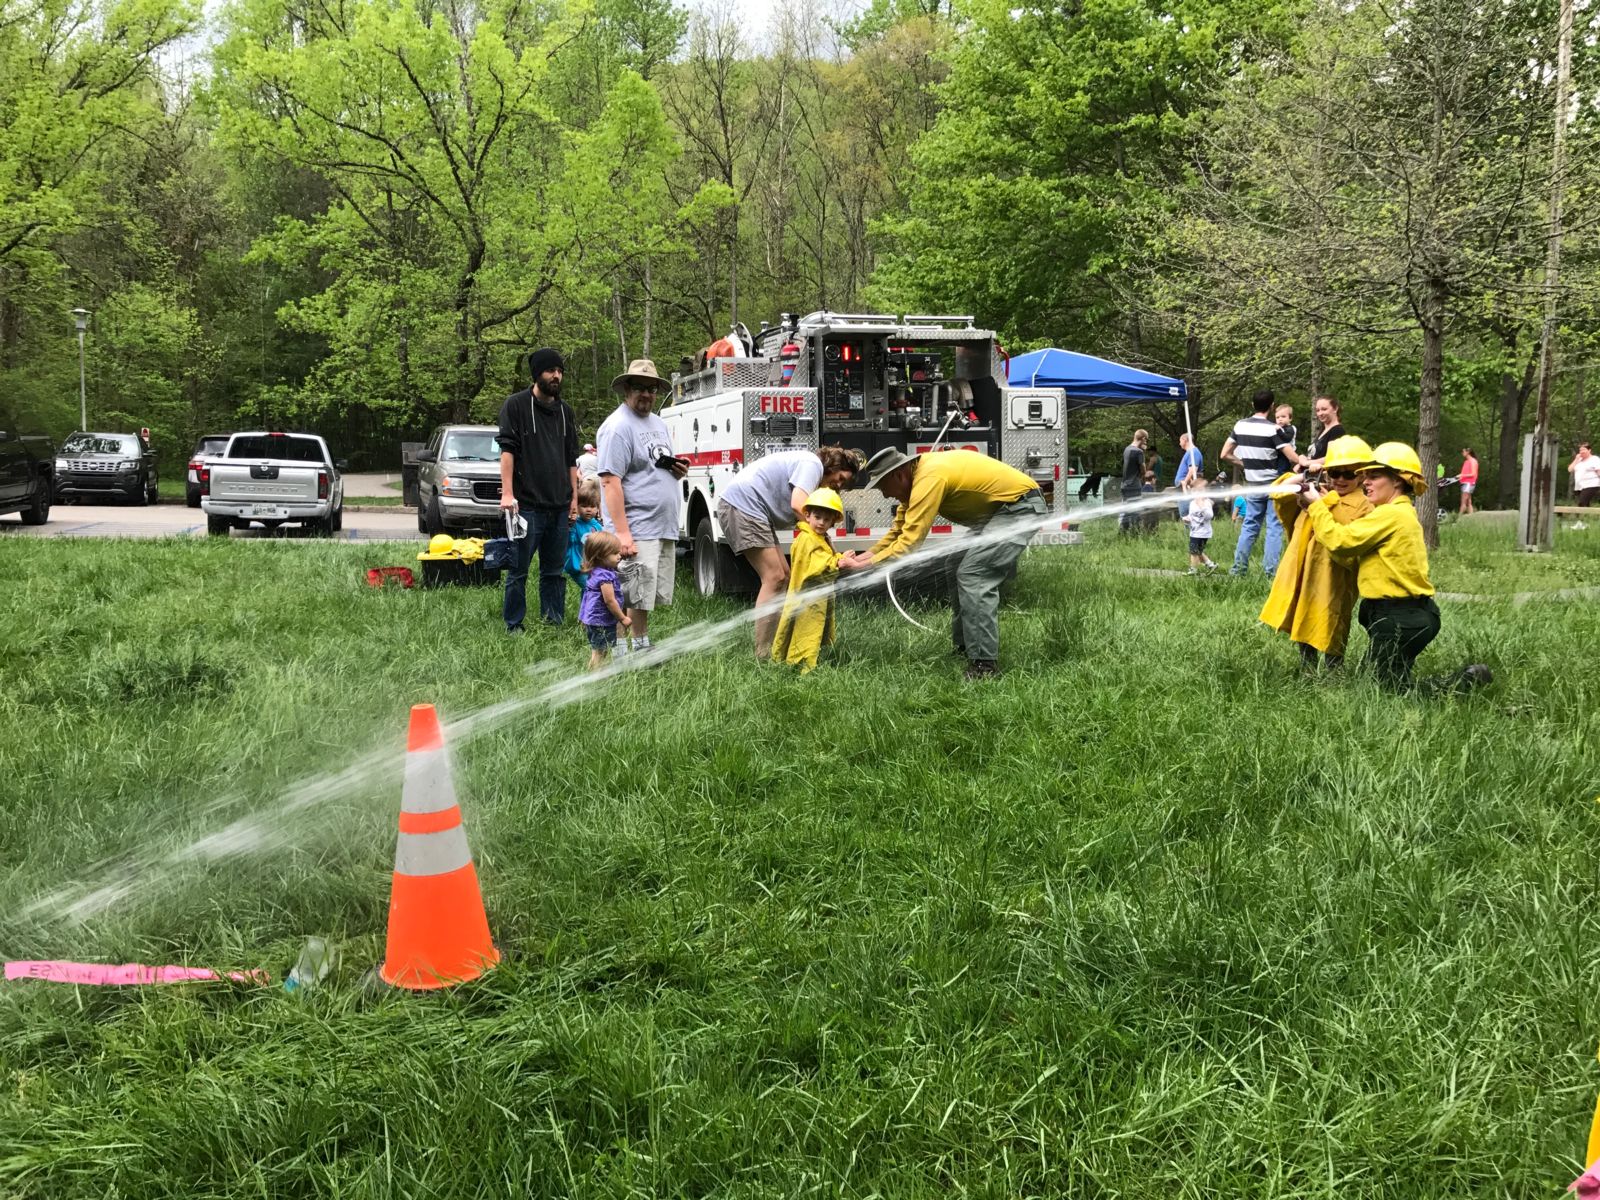 Junior Ranger Day 2017 at Great Smoky Mountains National Park learning about controlled fires.